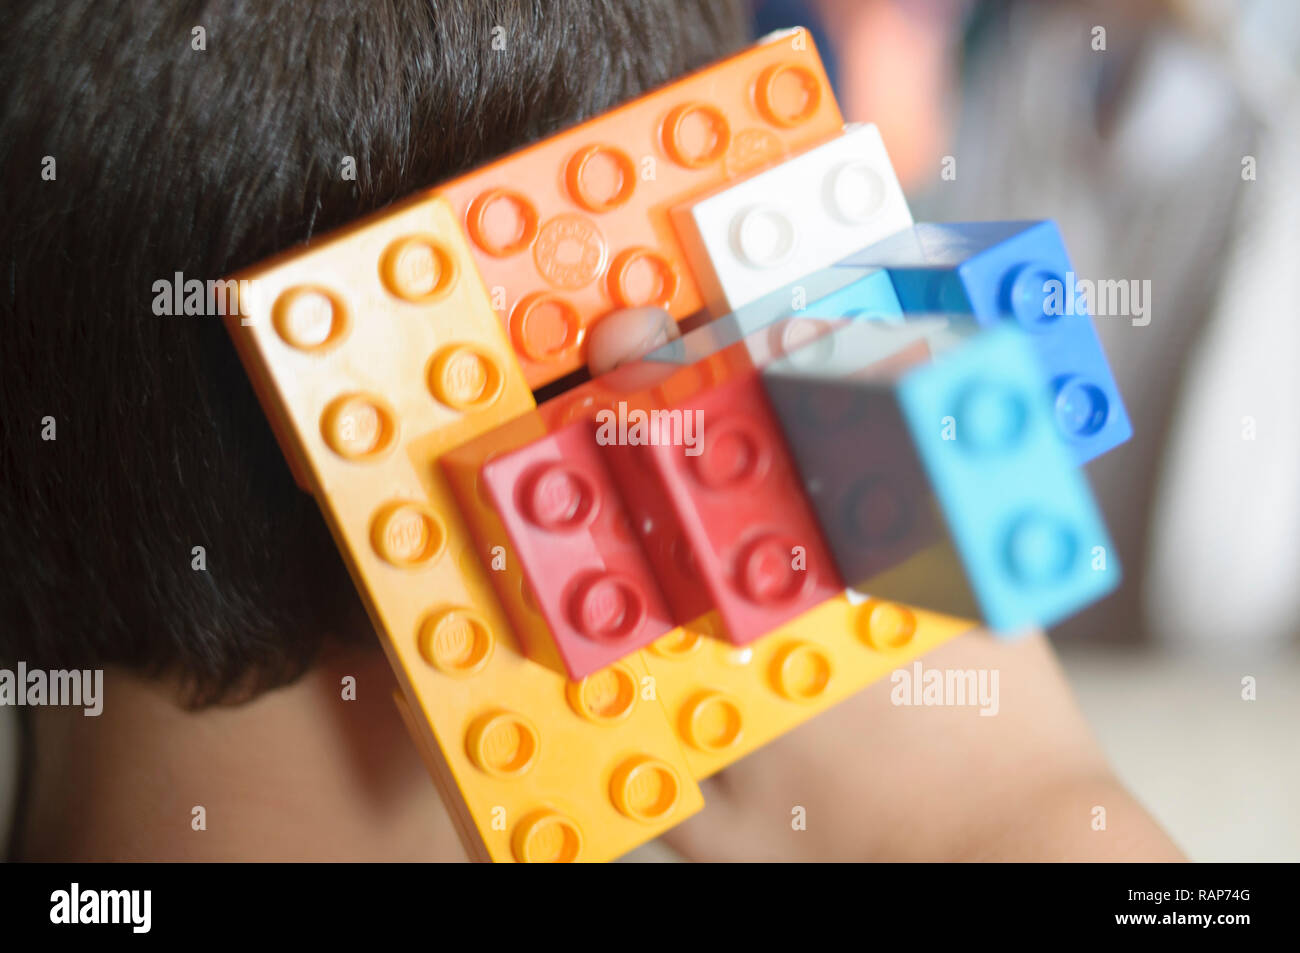 Boy playing with lego construction toy blocks. Stock Photo